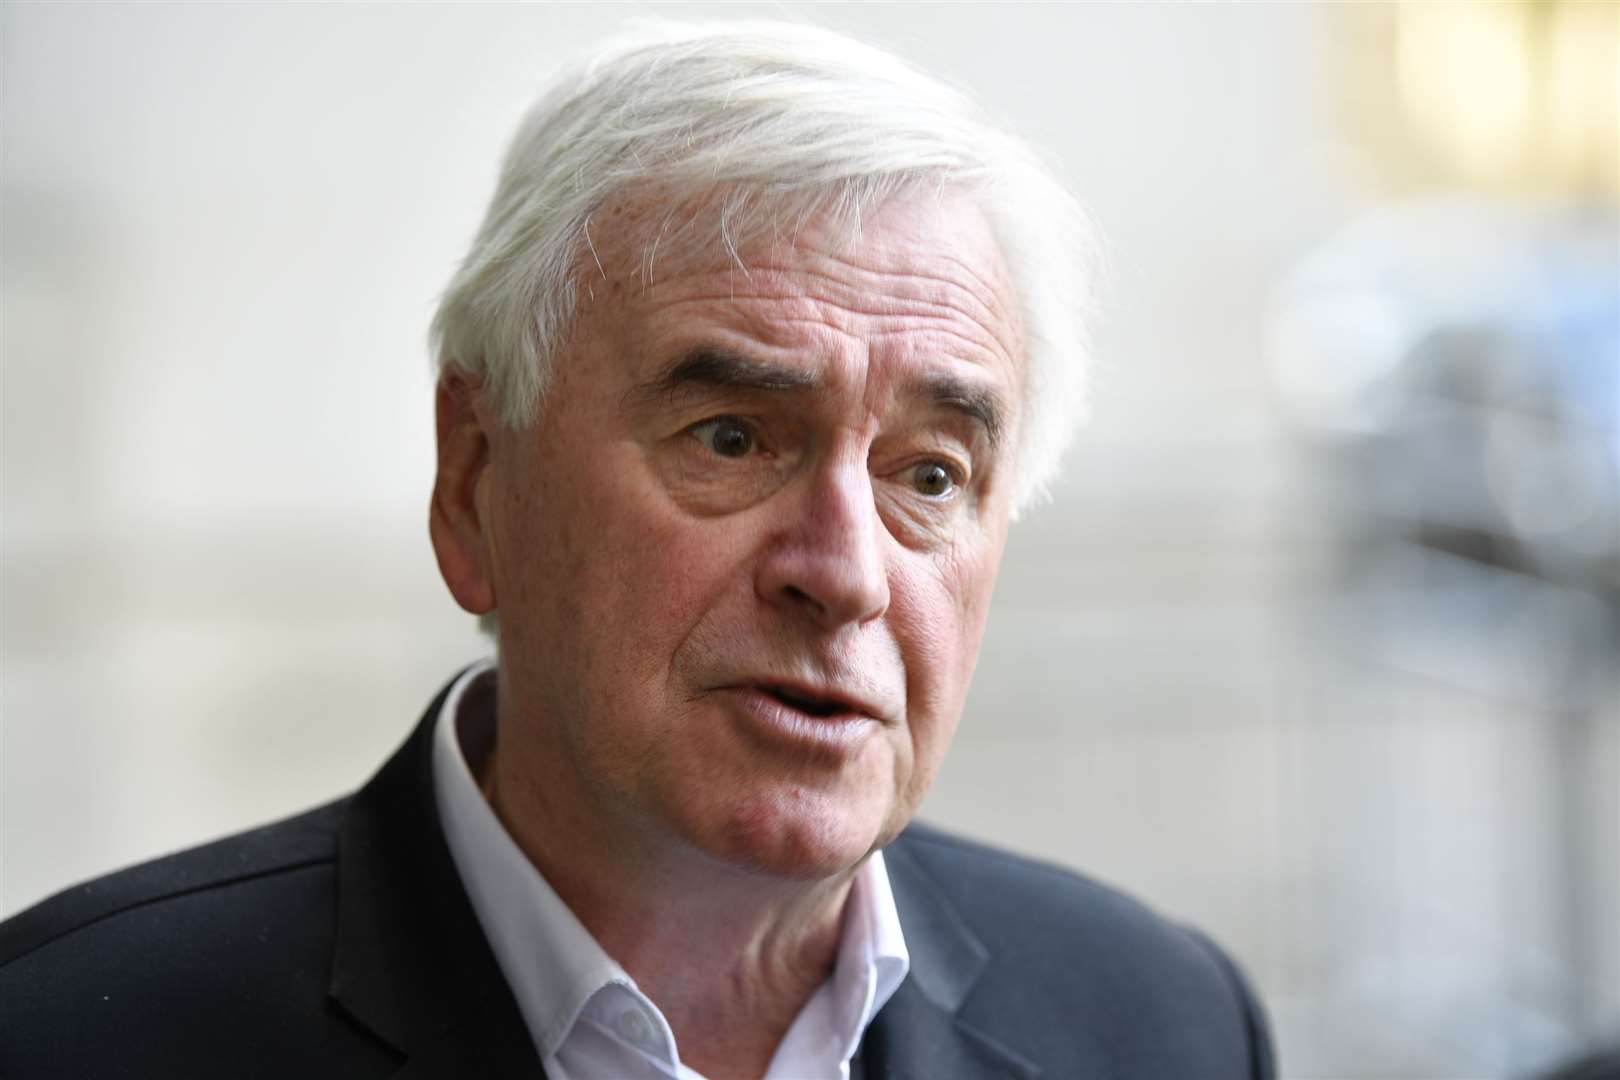 John McDonnell has called for peace (Beresford Hodge/PA)